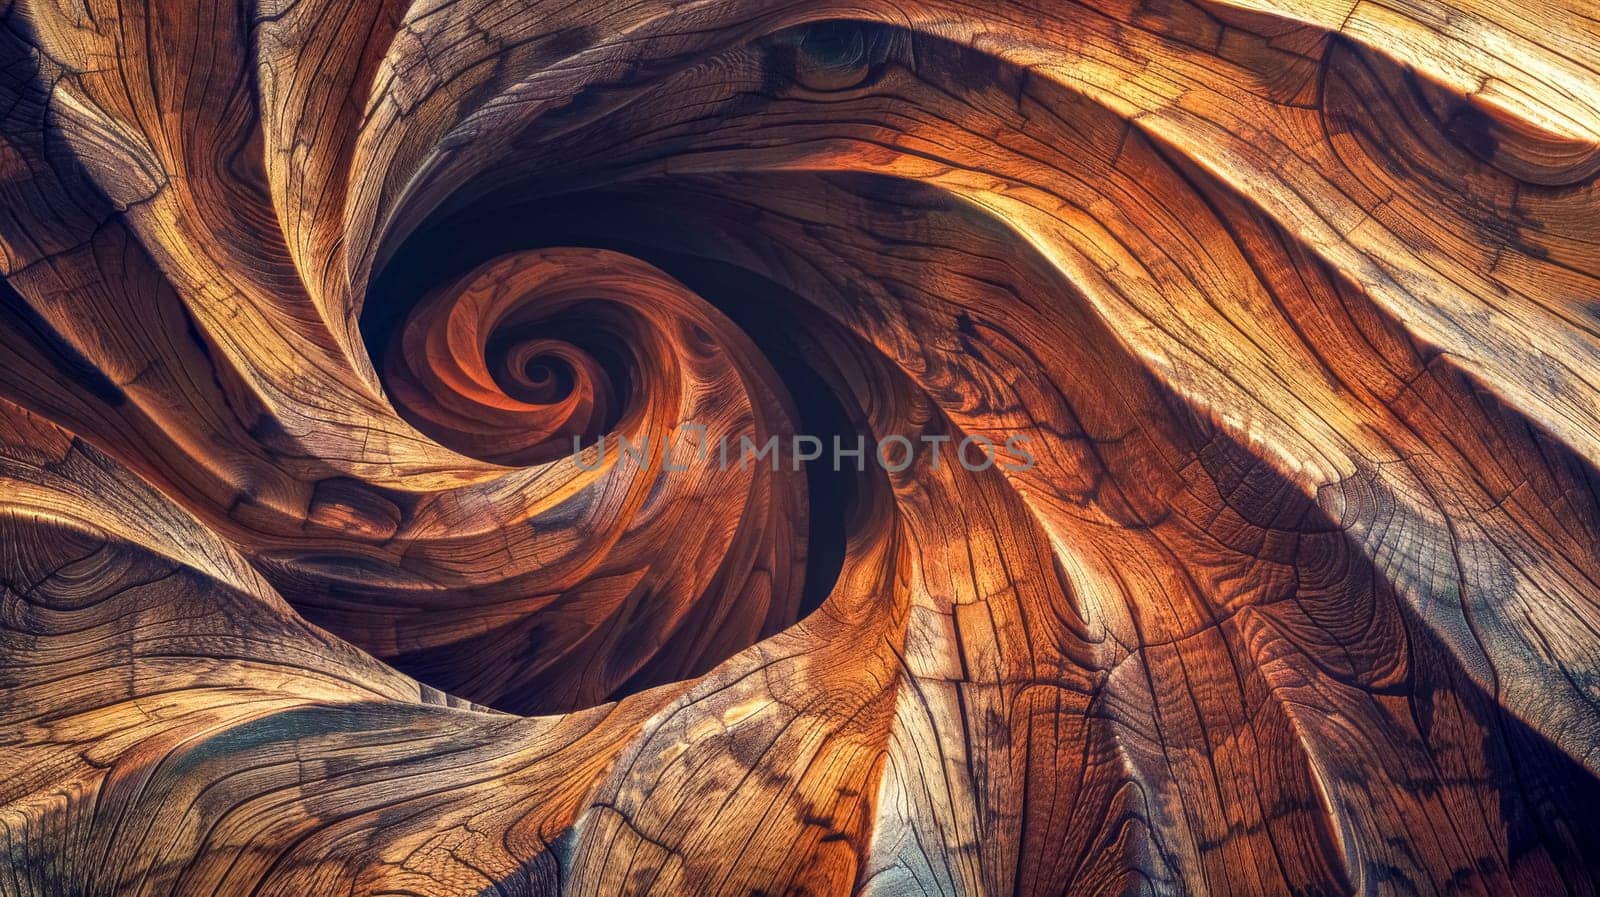 Captivating close-up shot of swirling wood grain patterns in a seamless abstract design